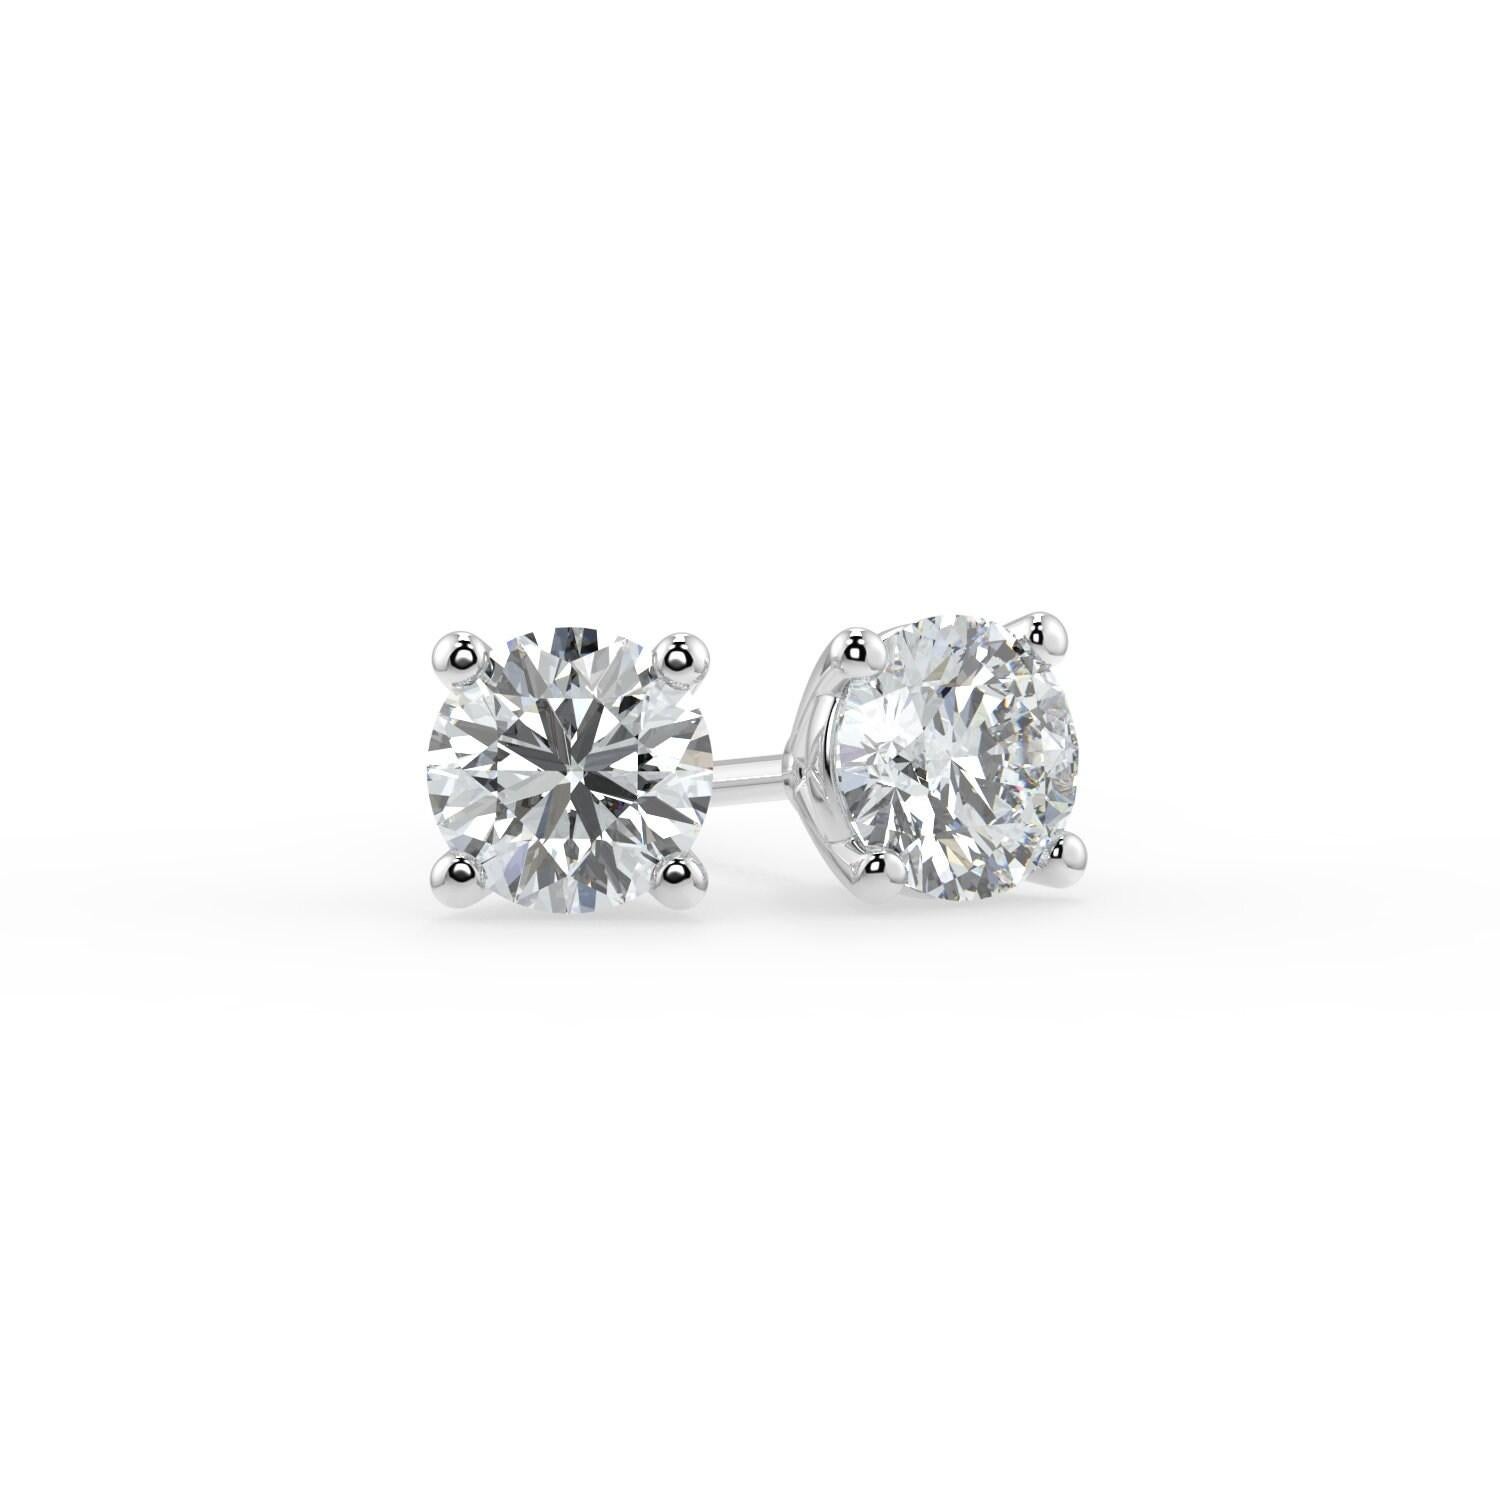 0.50 Ct Natural White Diamond  I1 Clarity Round Shape Solitaire 4 Prong Martini Style Unisex Studs with Butterfly Pushbacks 14K White Gold 

Specifications:
Metal: 14k white gold 
Diamond Shape: Round
Natural Diamond carat weight: 0.50CTW
Diamond